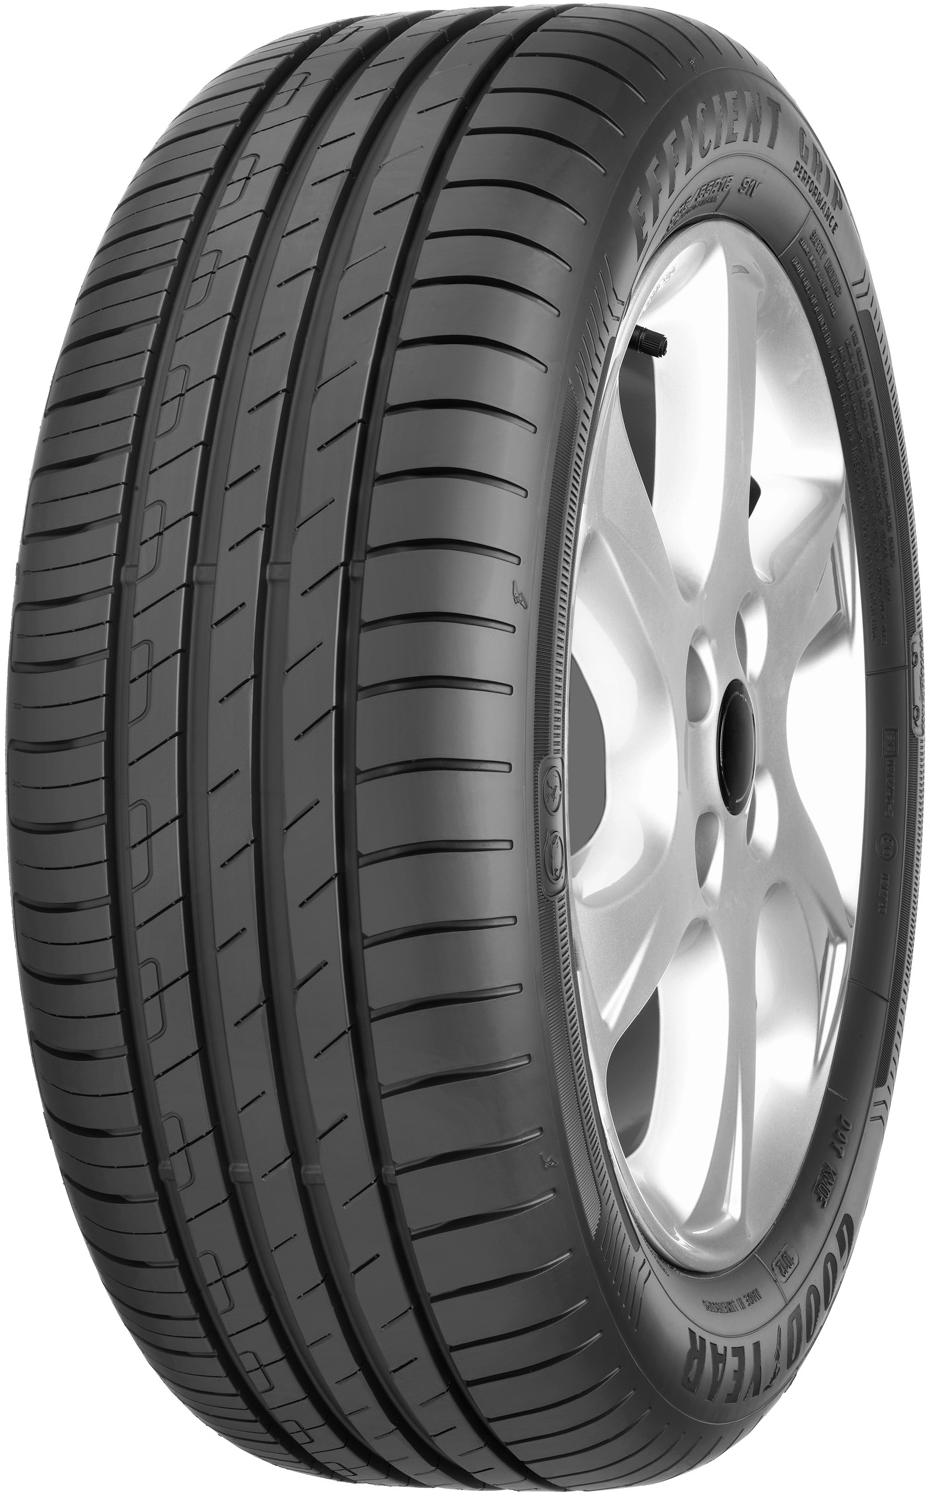 Anvelope auto GOODYEAR EFFIPERFRO RFT BMW FP 195/55 R16 87W